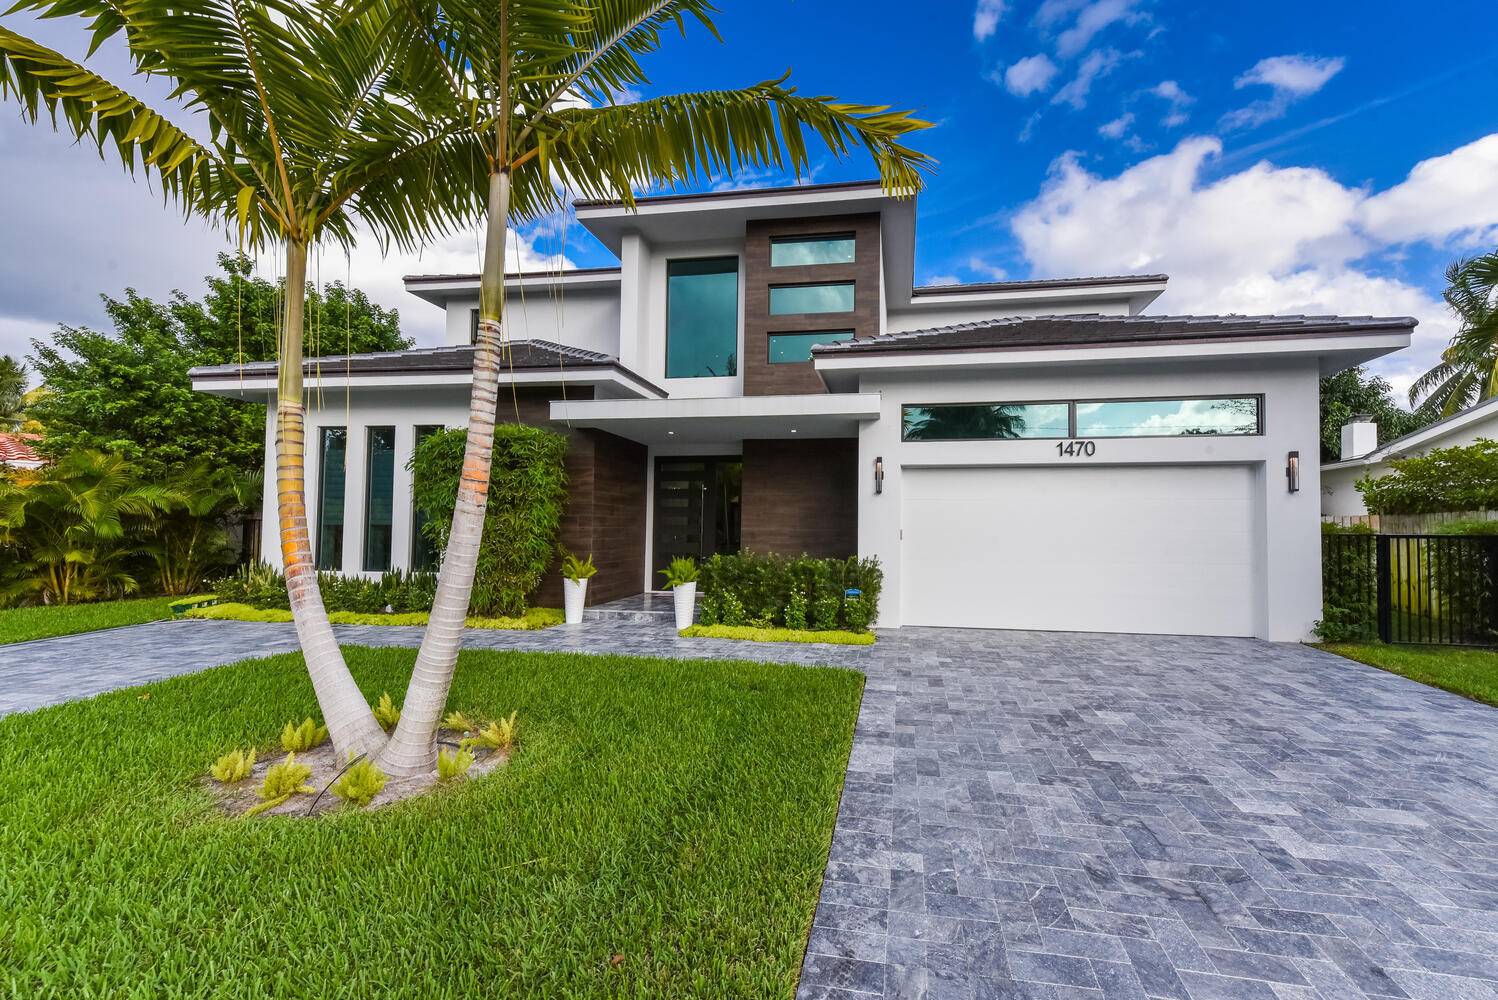 Stunning contemporary home located in the coveted Golden Triangle area, positioned conveniently between Mizner Park and the 20th Street shopping district, the open floor plan immediately captivates attention.